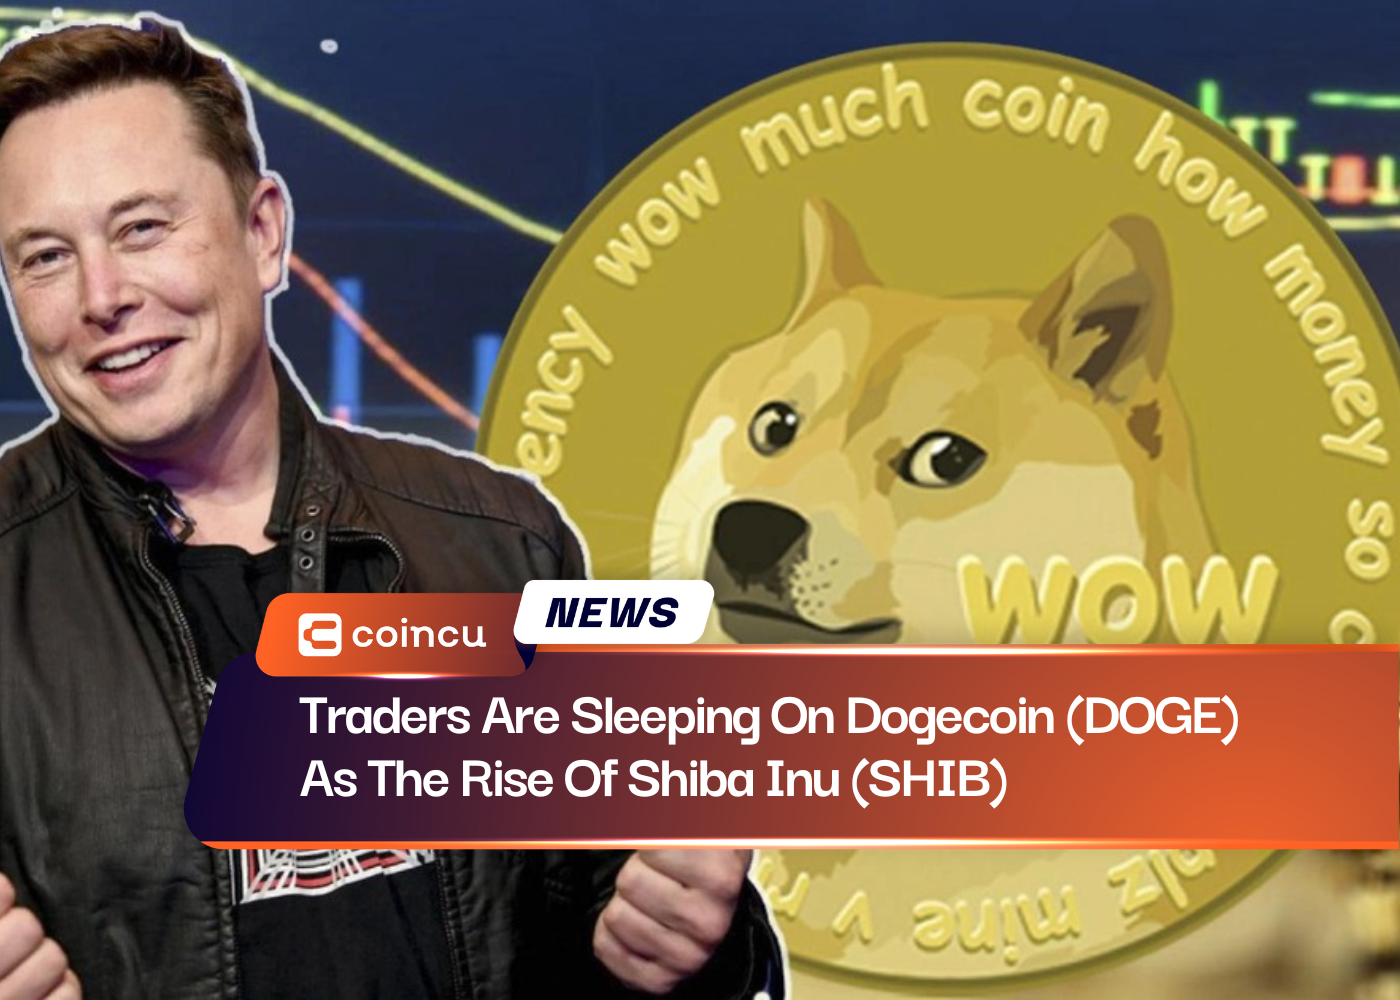 Traders Are Sleeping On Dogecoin (DOGE) As The Rise Of Shiba Inu (SHIB)